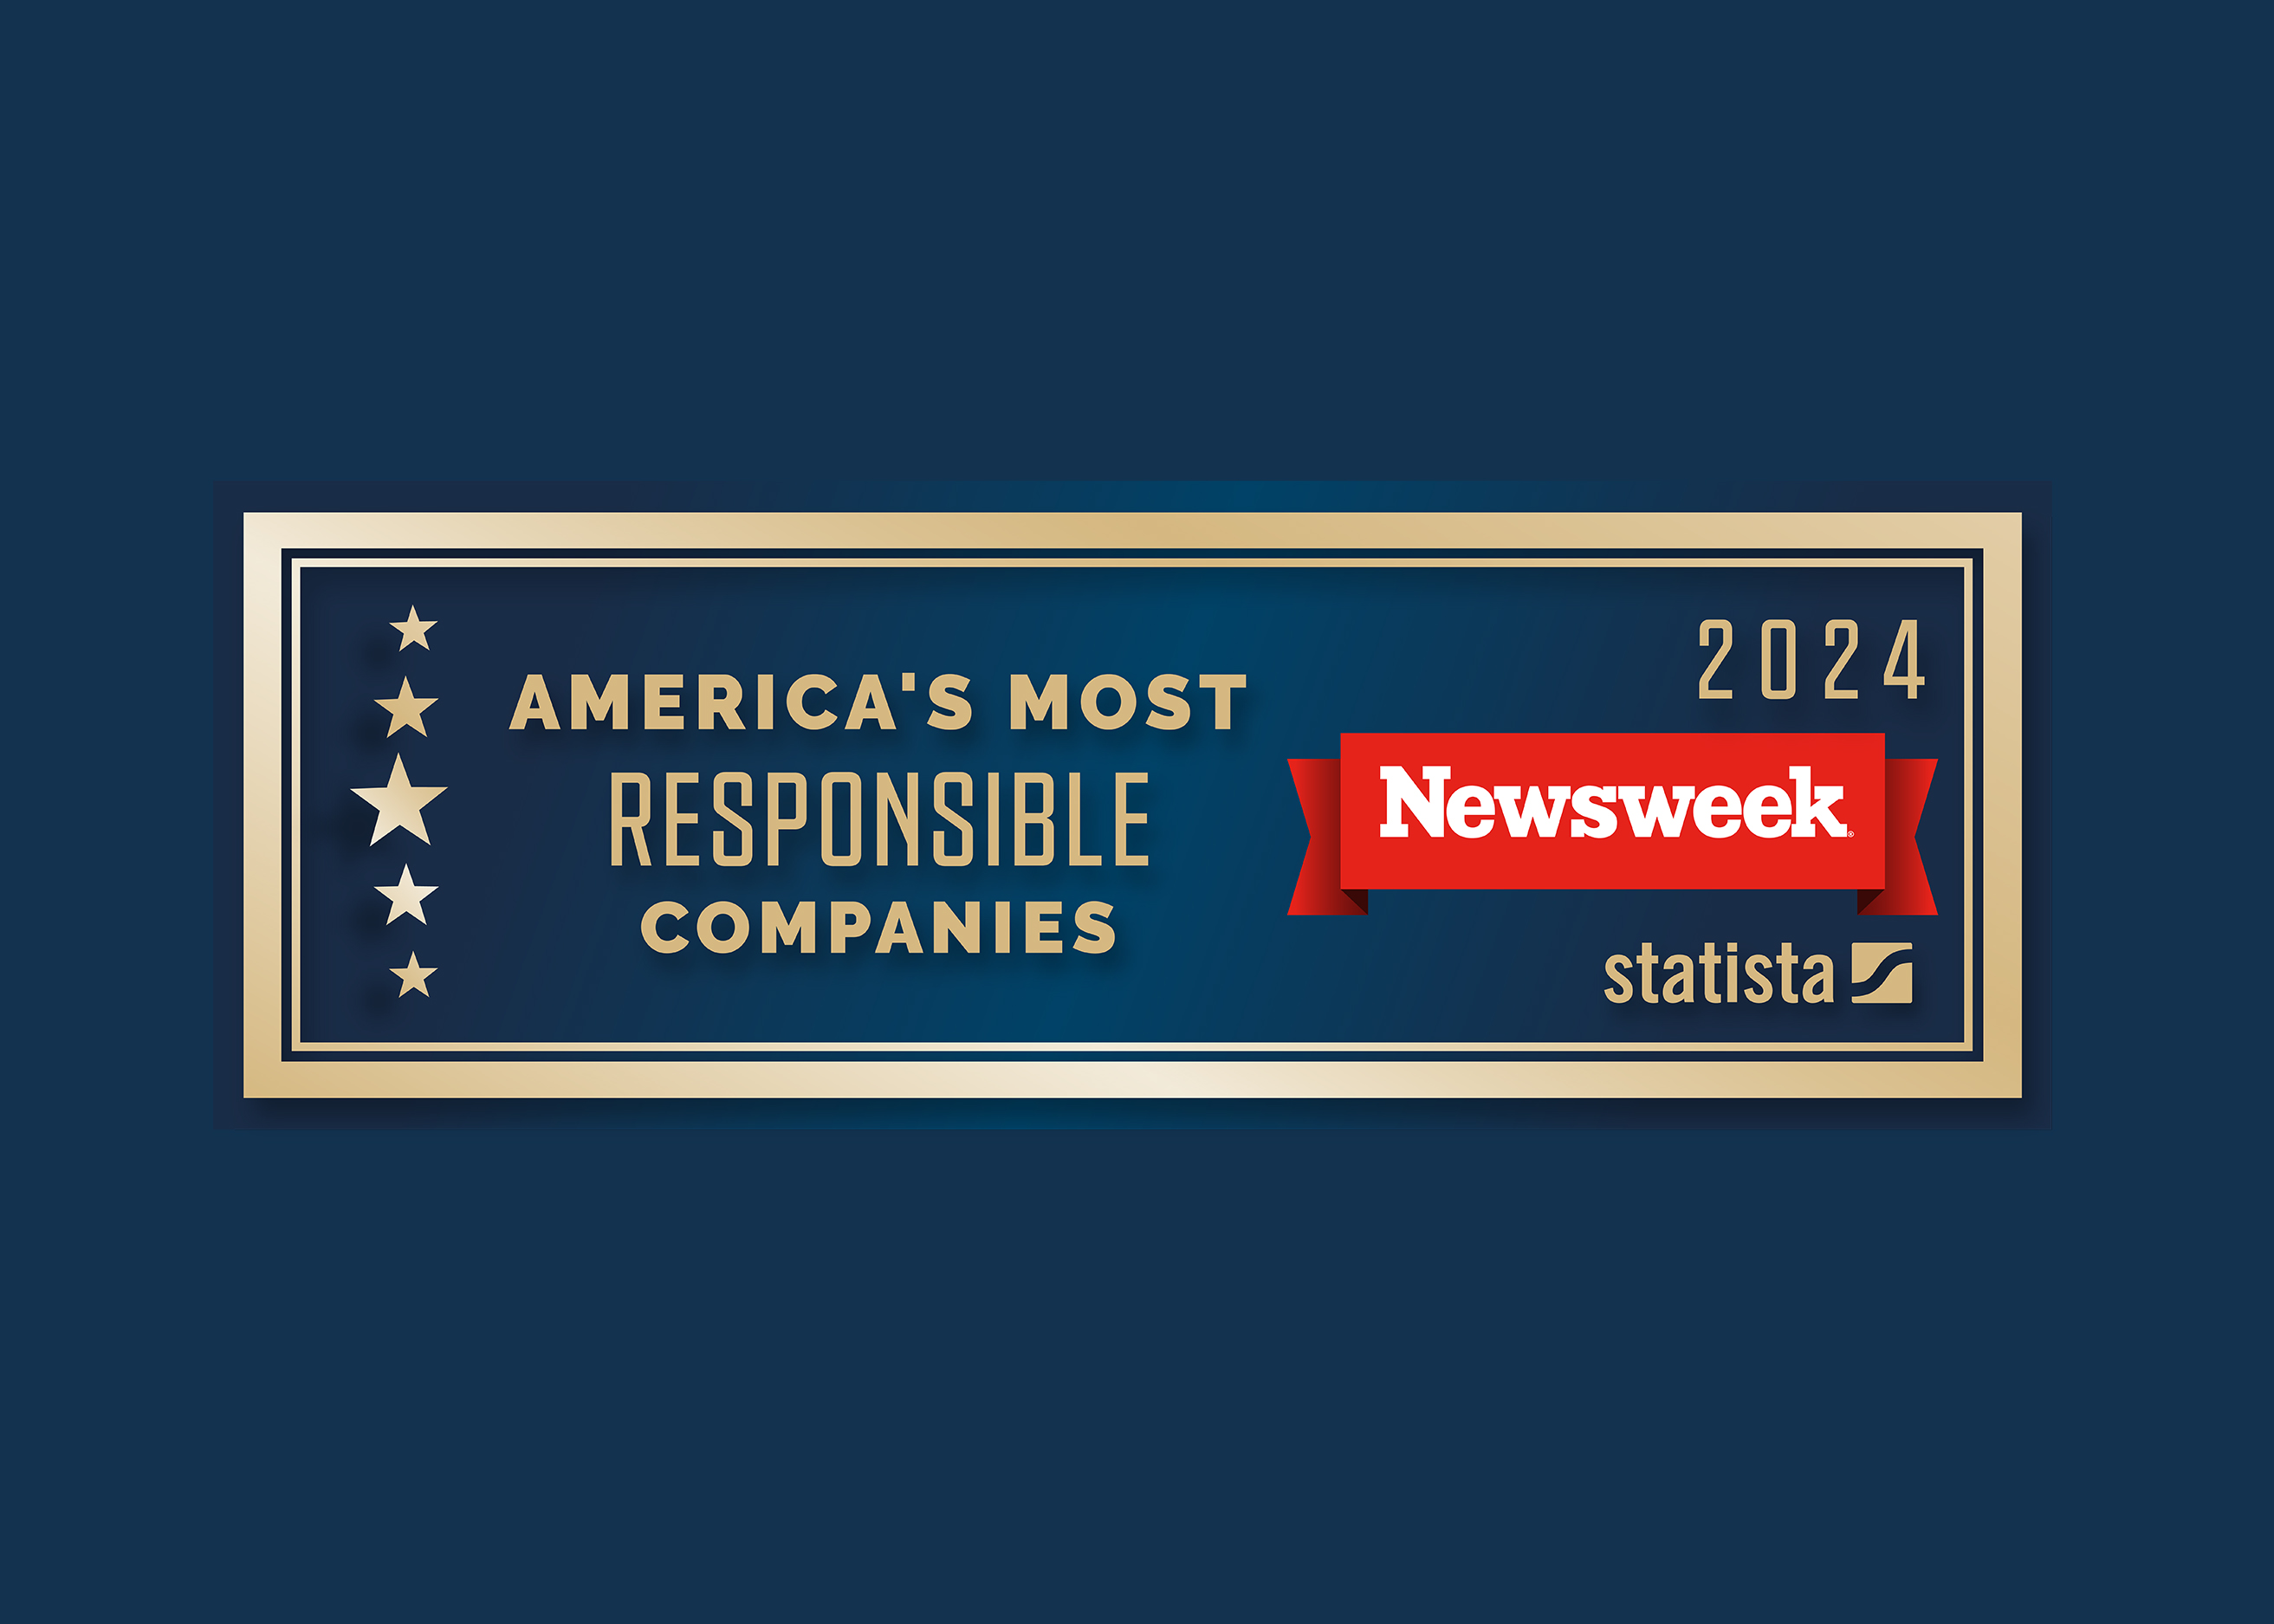 Sempra recognized among America’s Most Responsible Companies by Newsweek